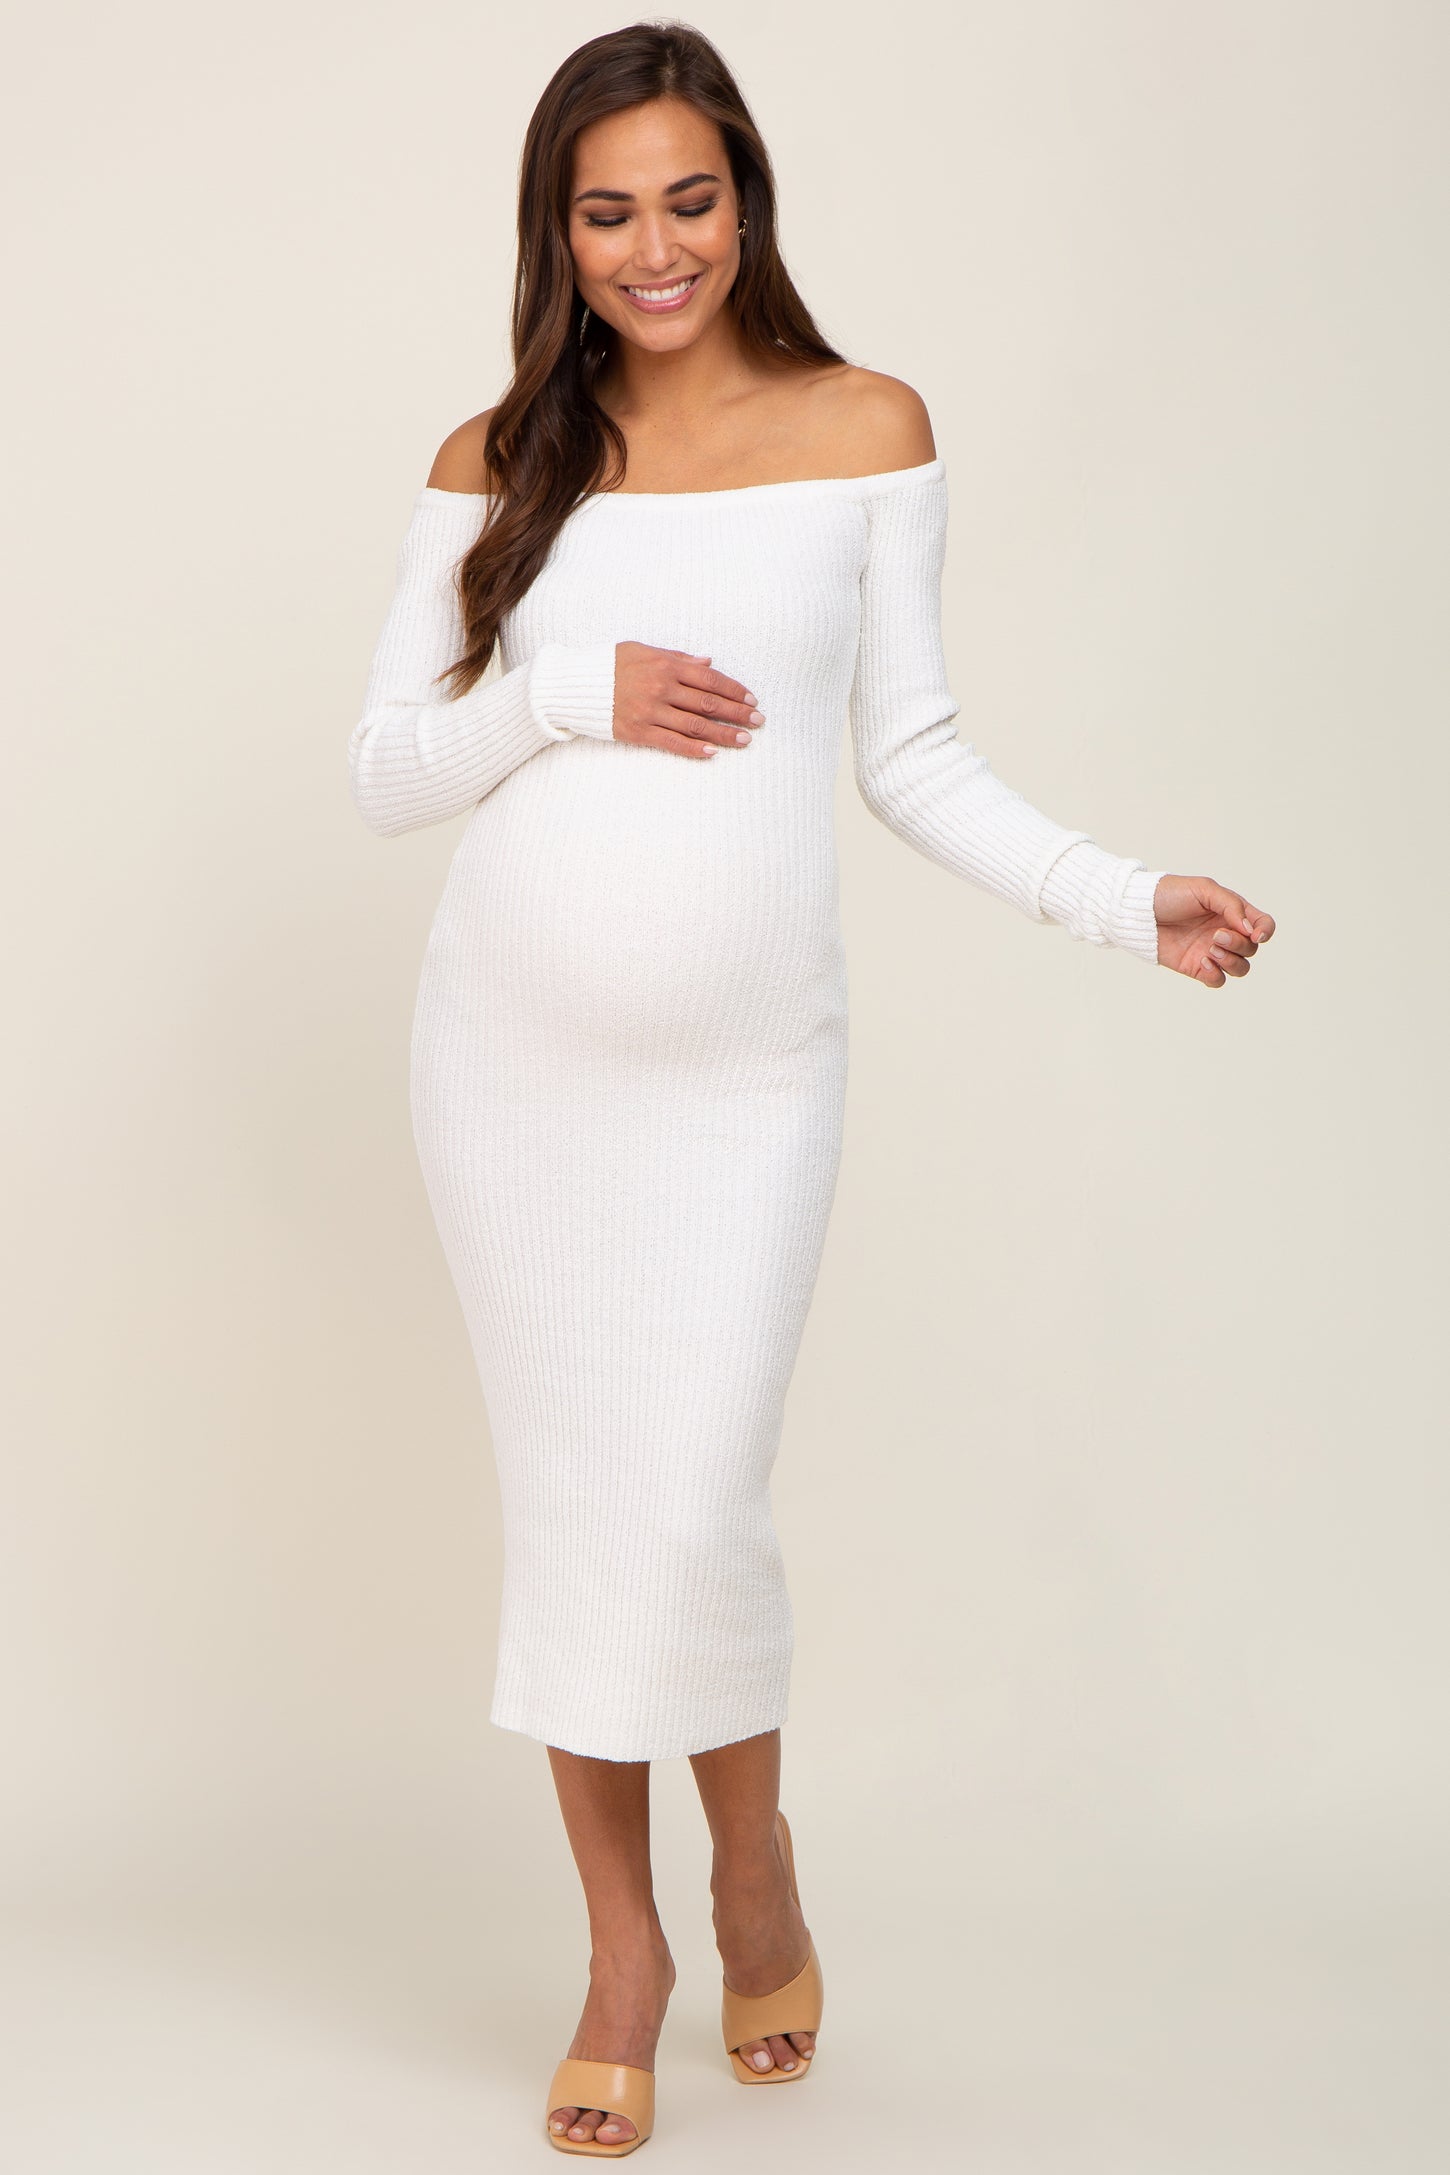 Oh Baby White Maternity One Shoulder Bodycon Maxi Dress – Club L